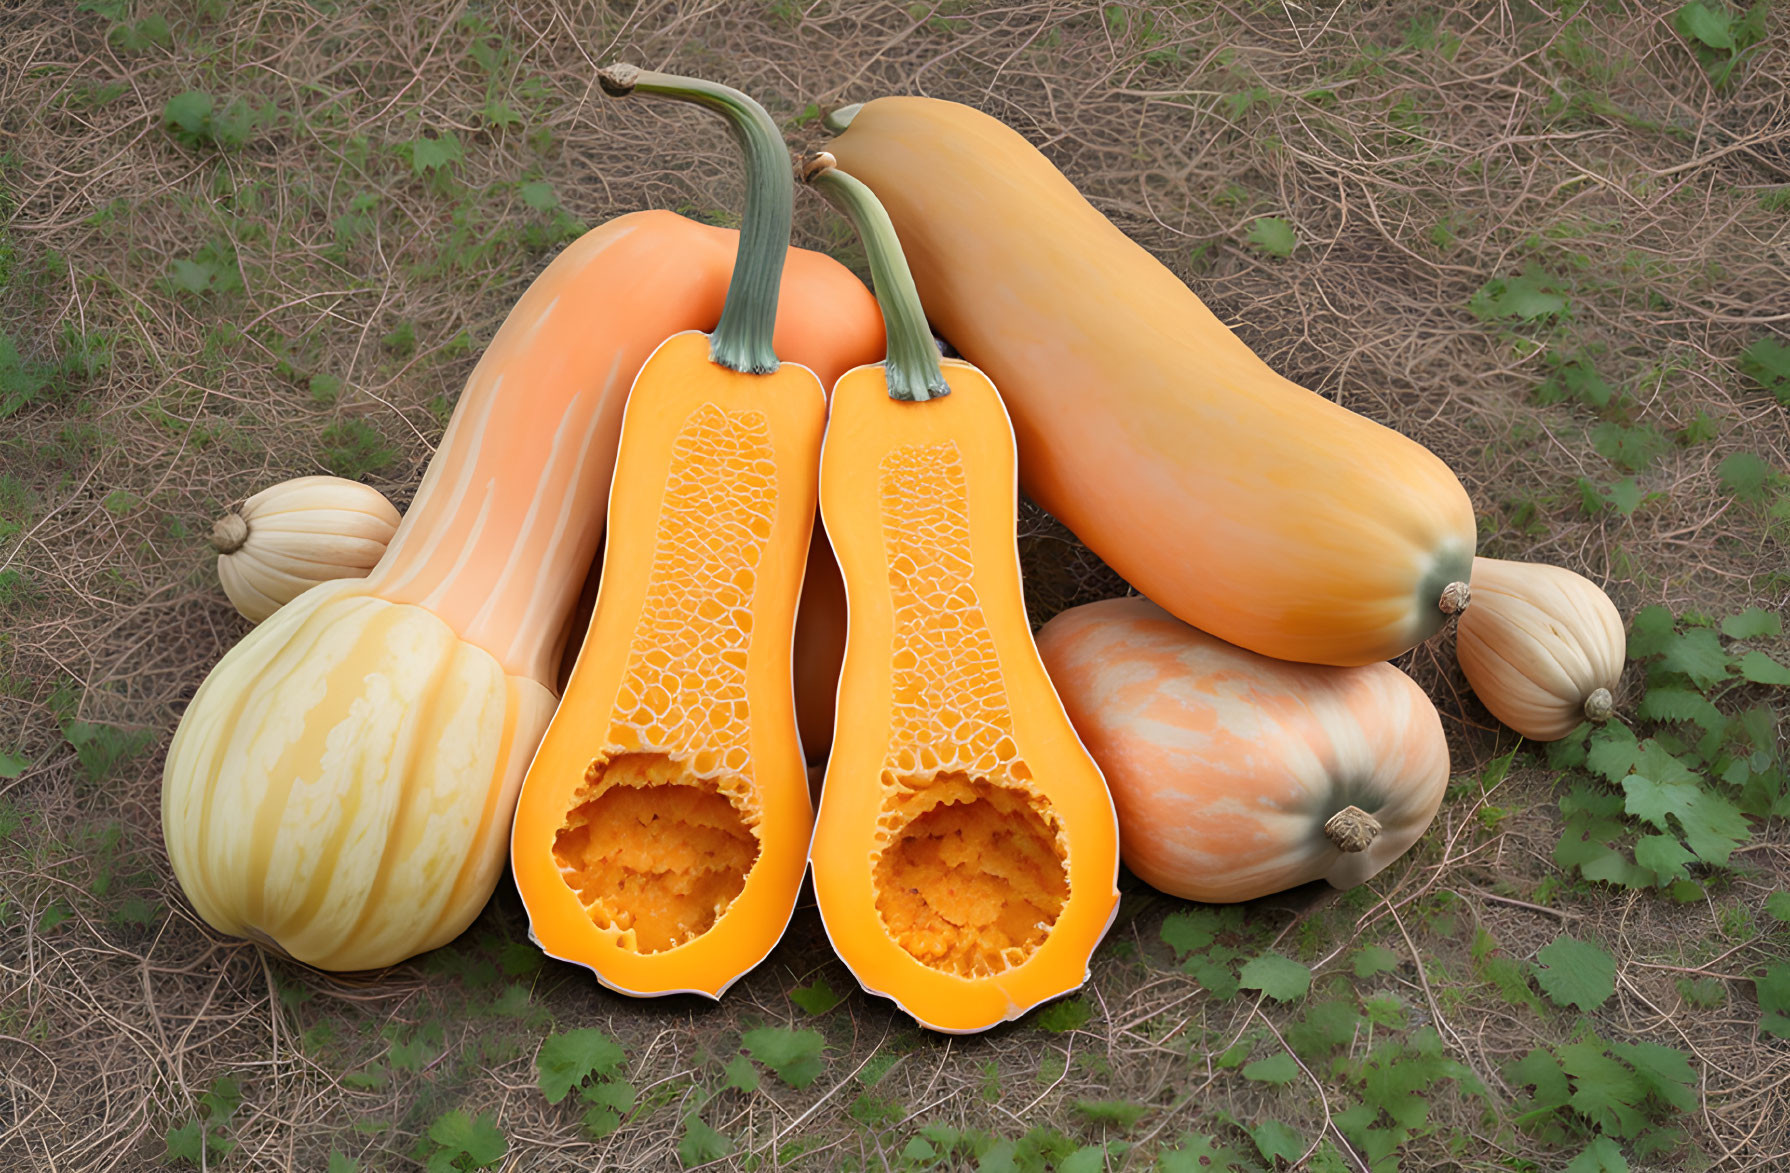 Butternut squash of various sizes and colors